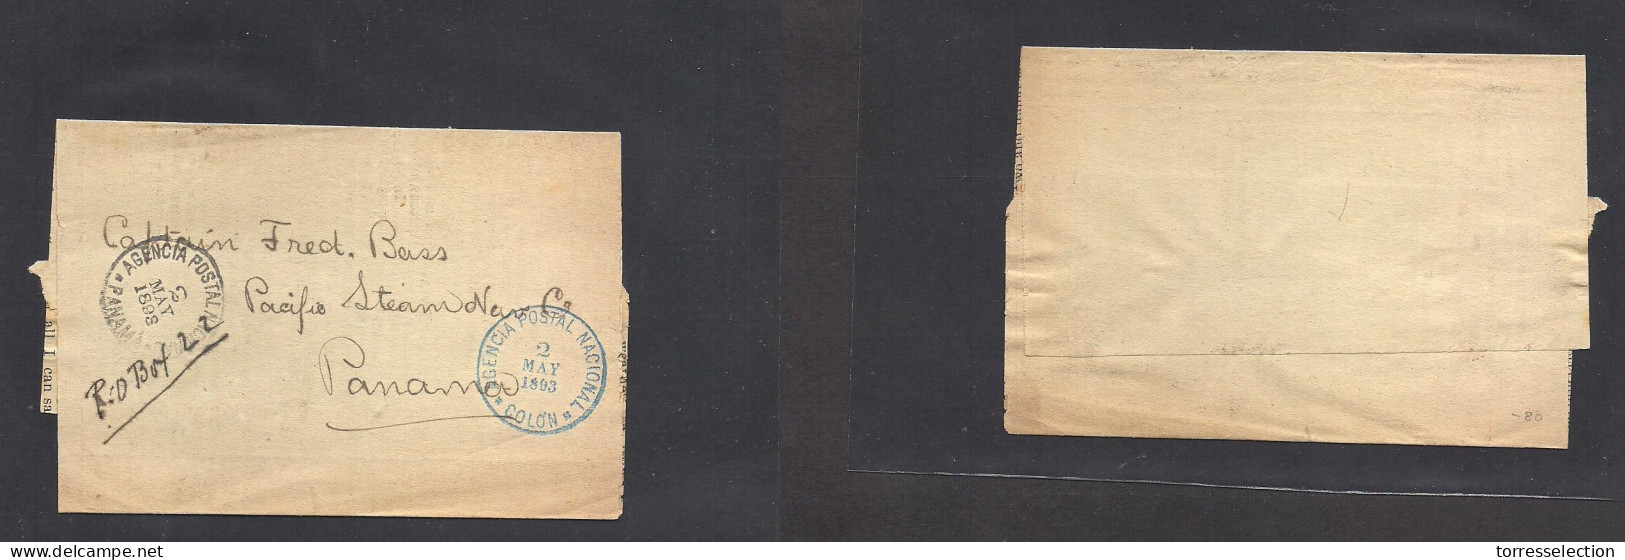 PANAMA. 1893 (2 May) APN Colon - Panama (2 May) Complete Wrapper Free Mail Blue Depart Cds + Arrival Cachet On Front. Ad - Panamá